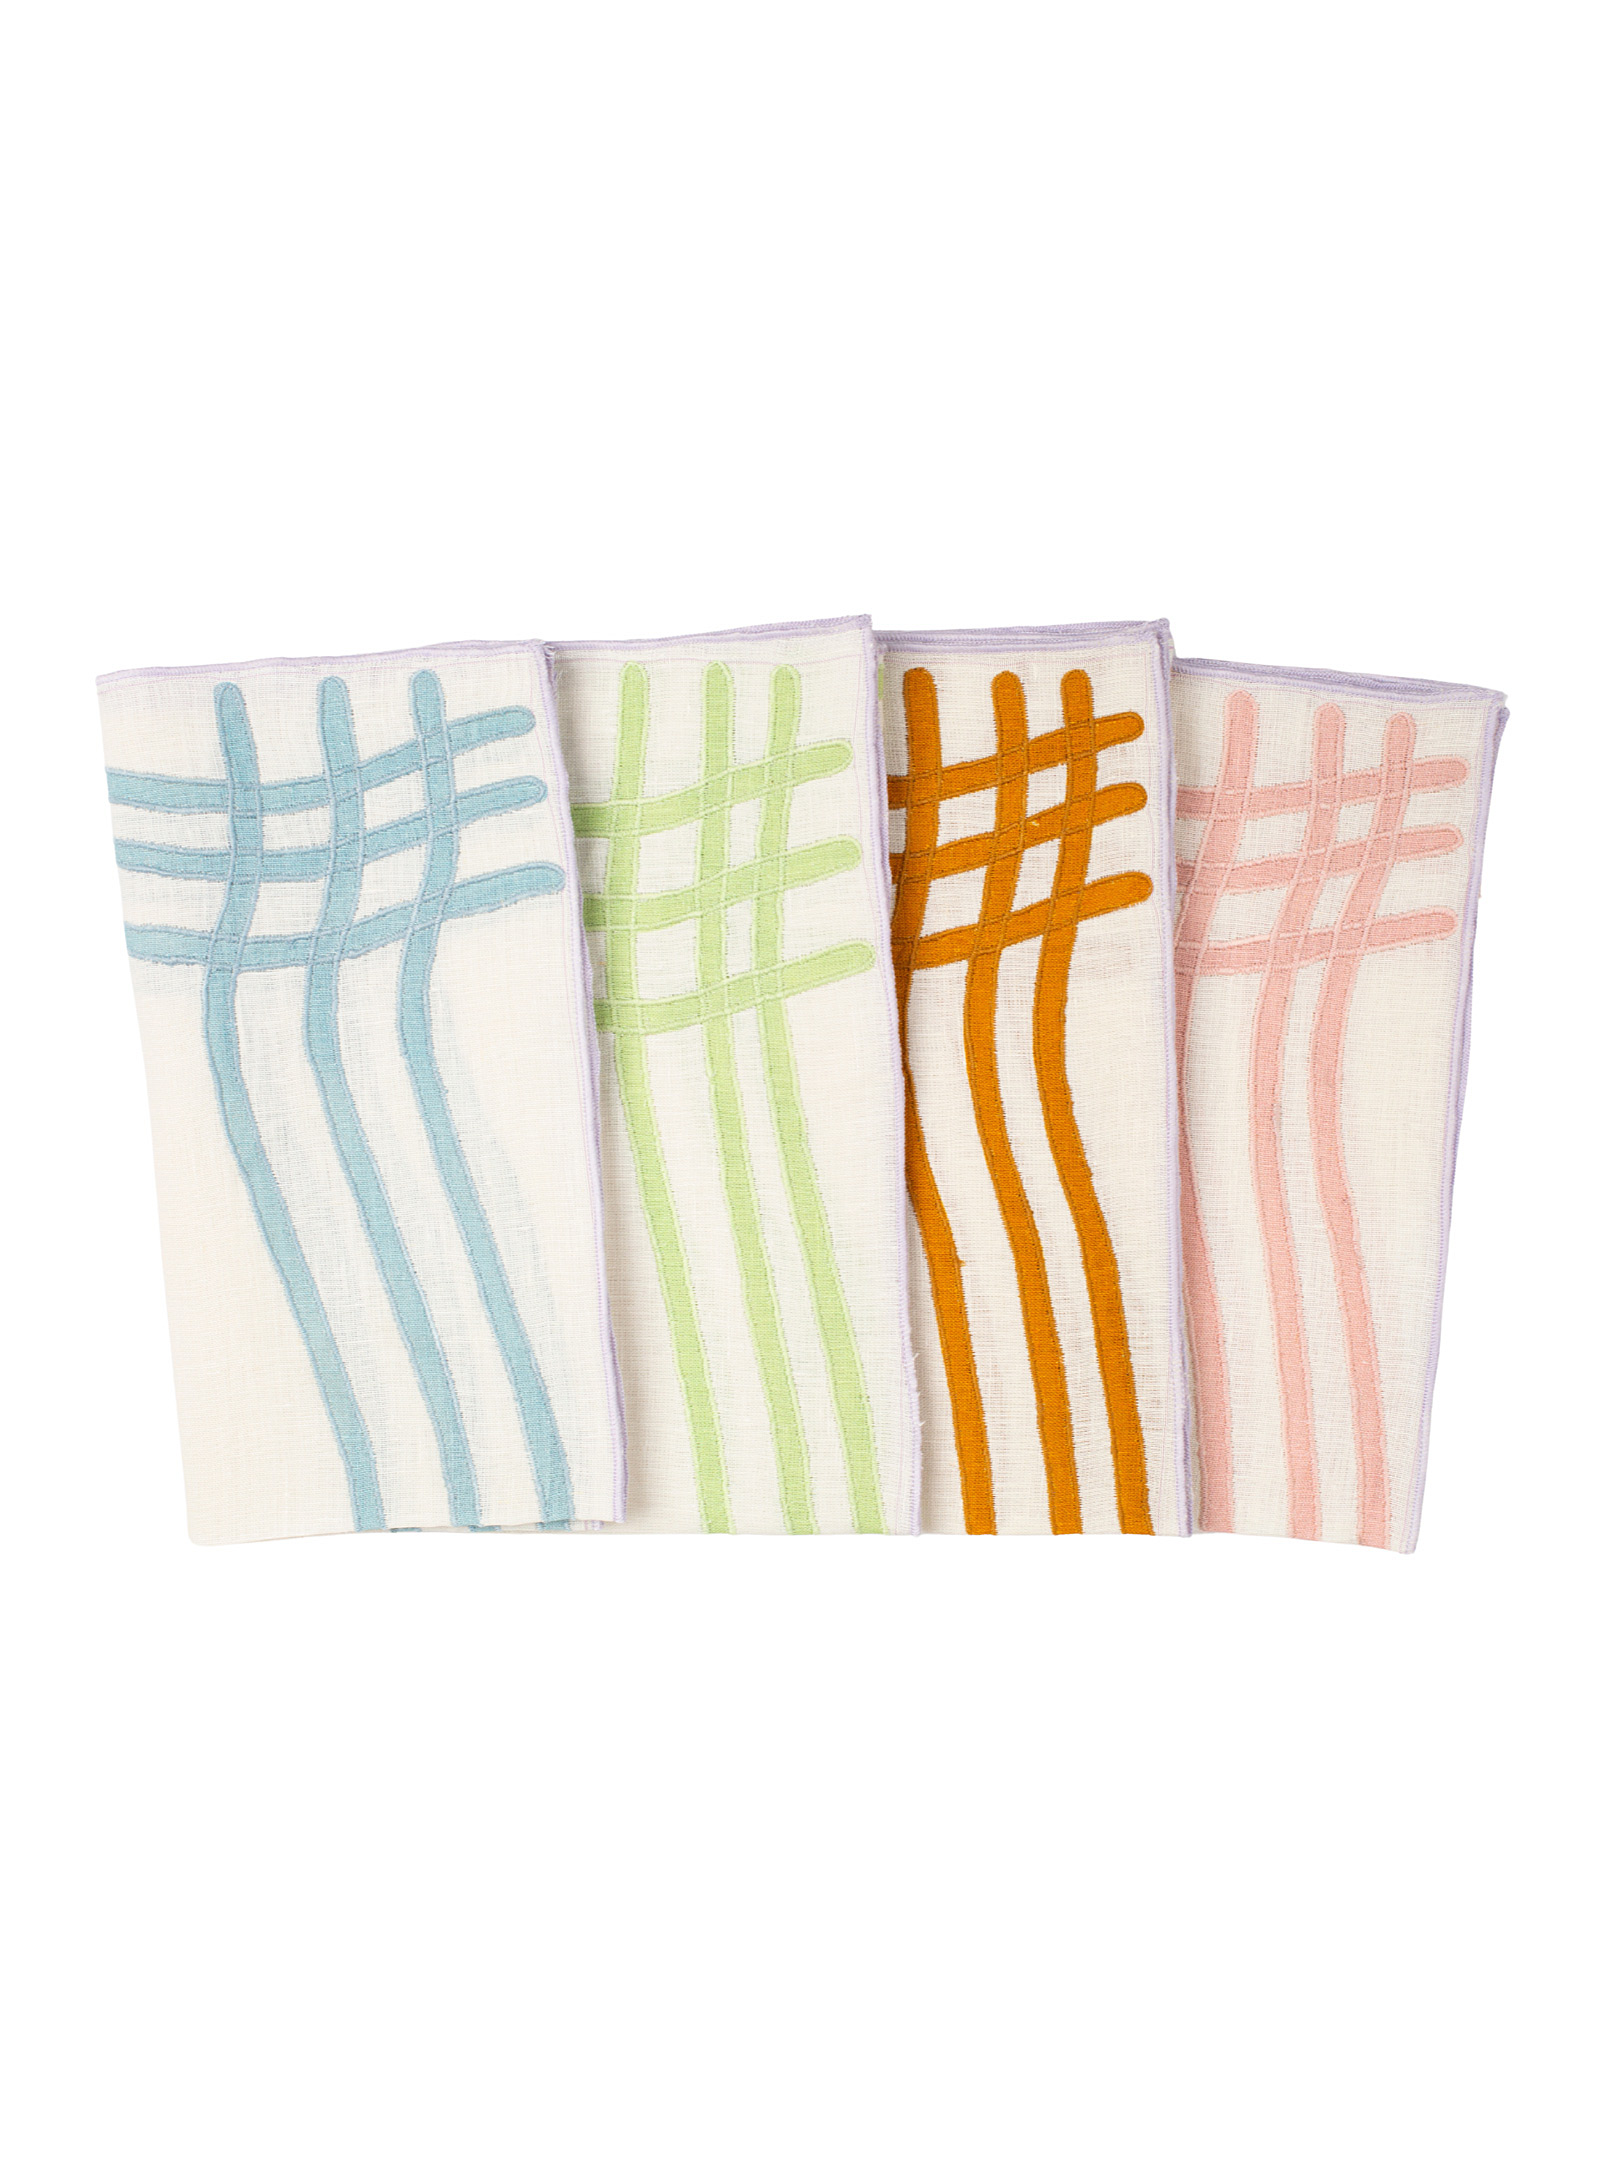 Misette Wavy Checkers Linen Napkins Set Of 4 In Assorted